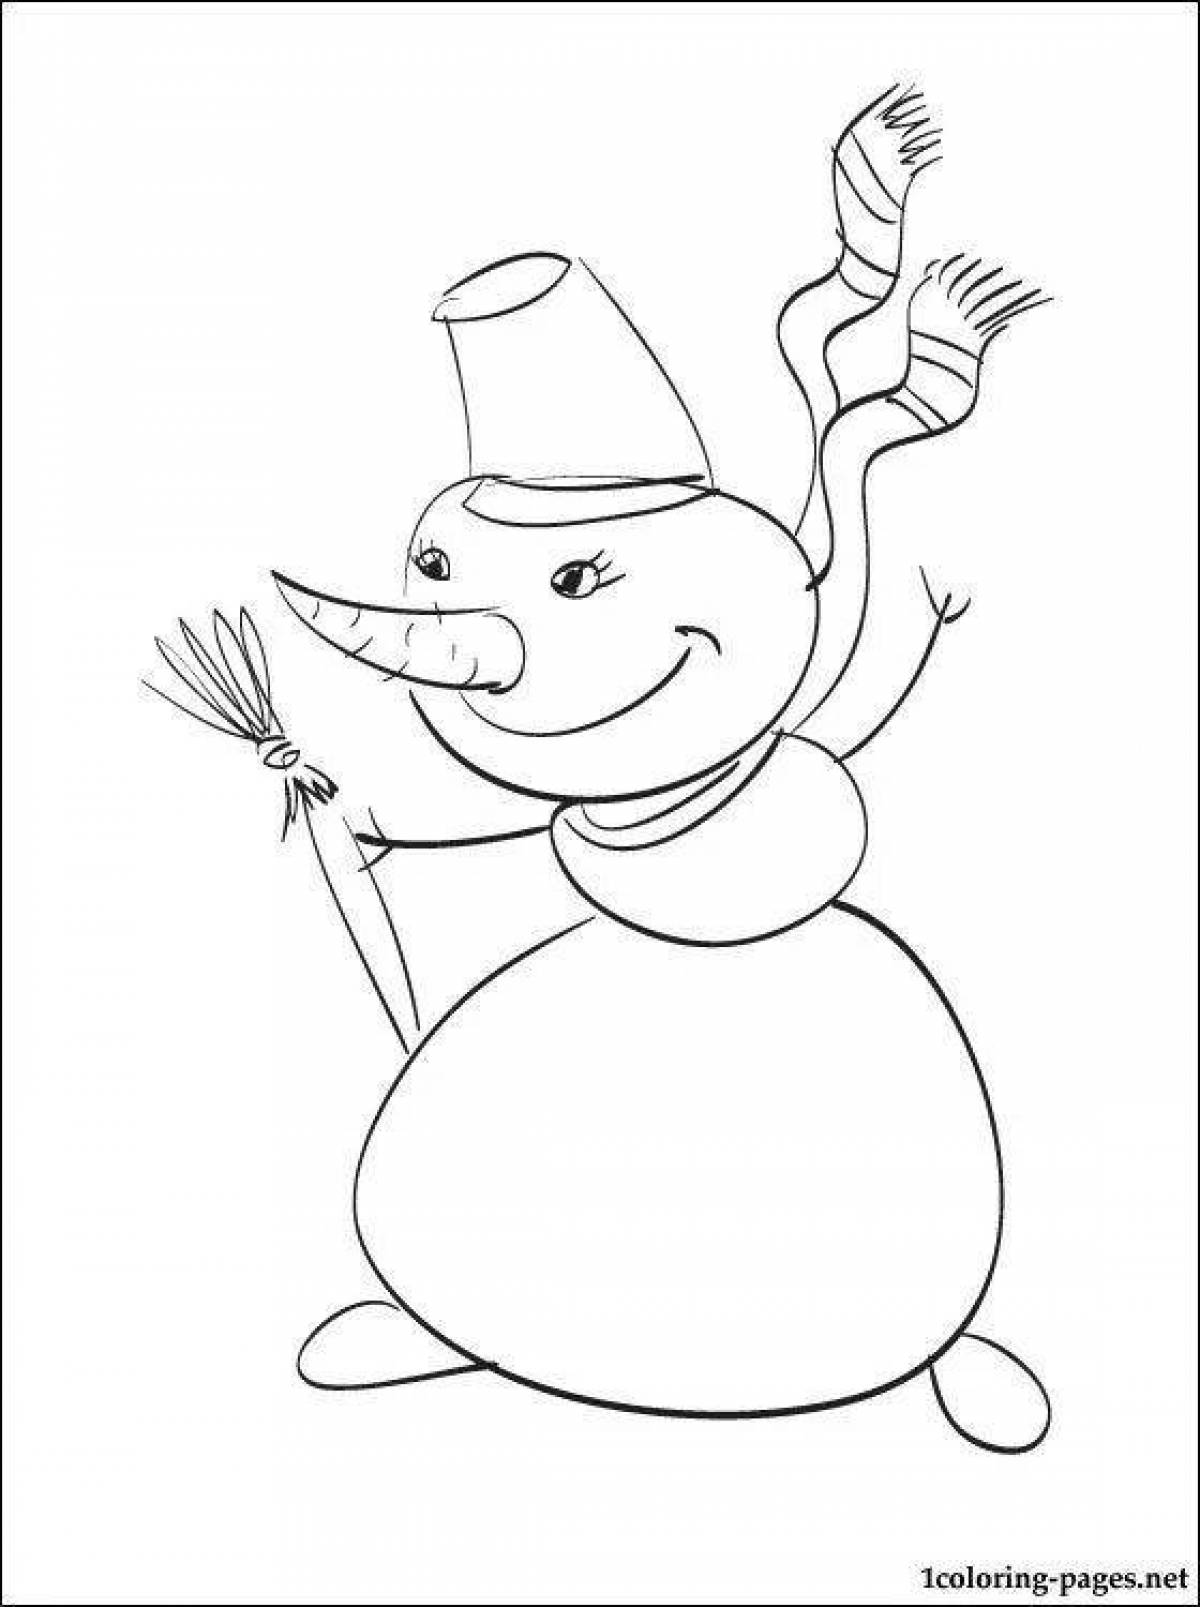 Funny snowman coloring book